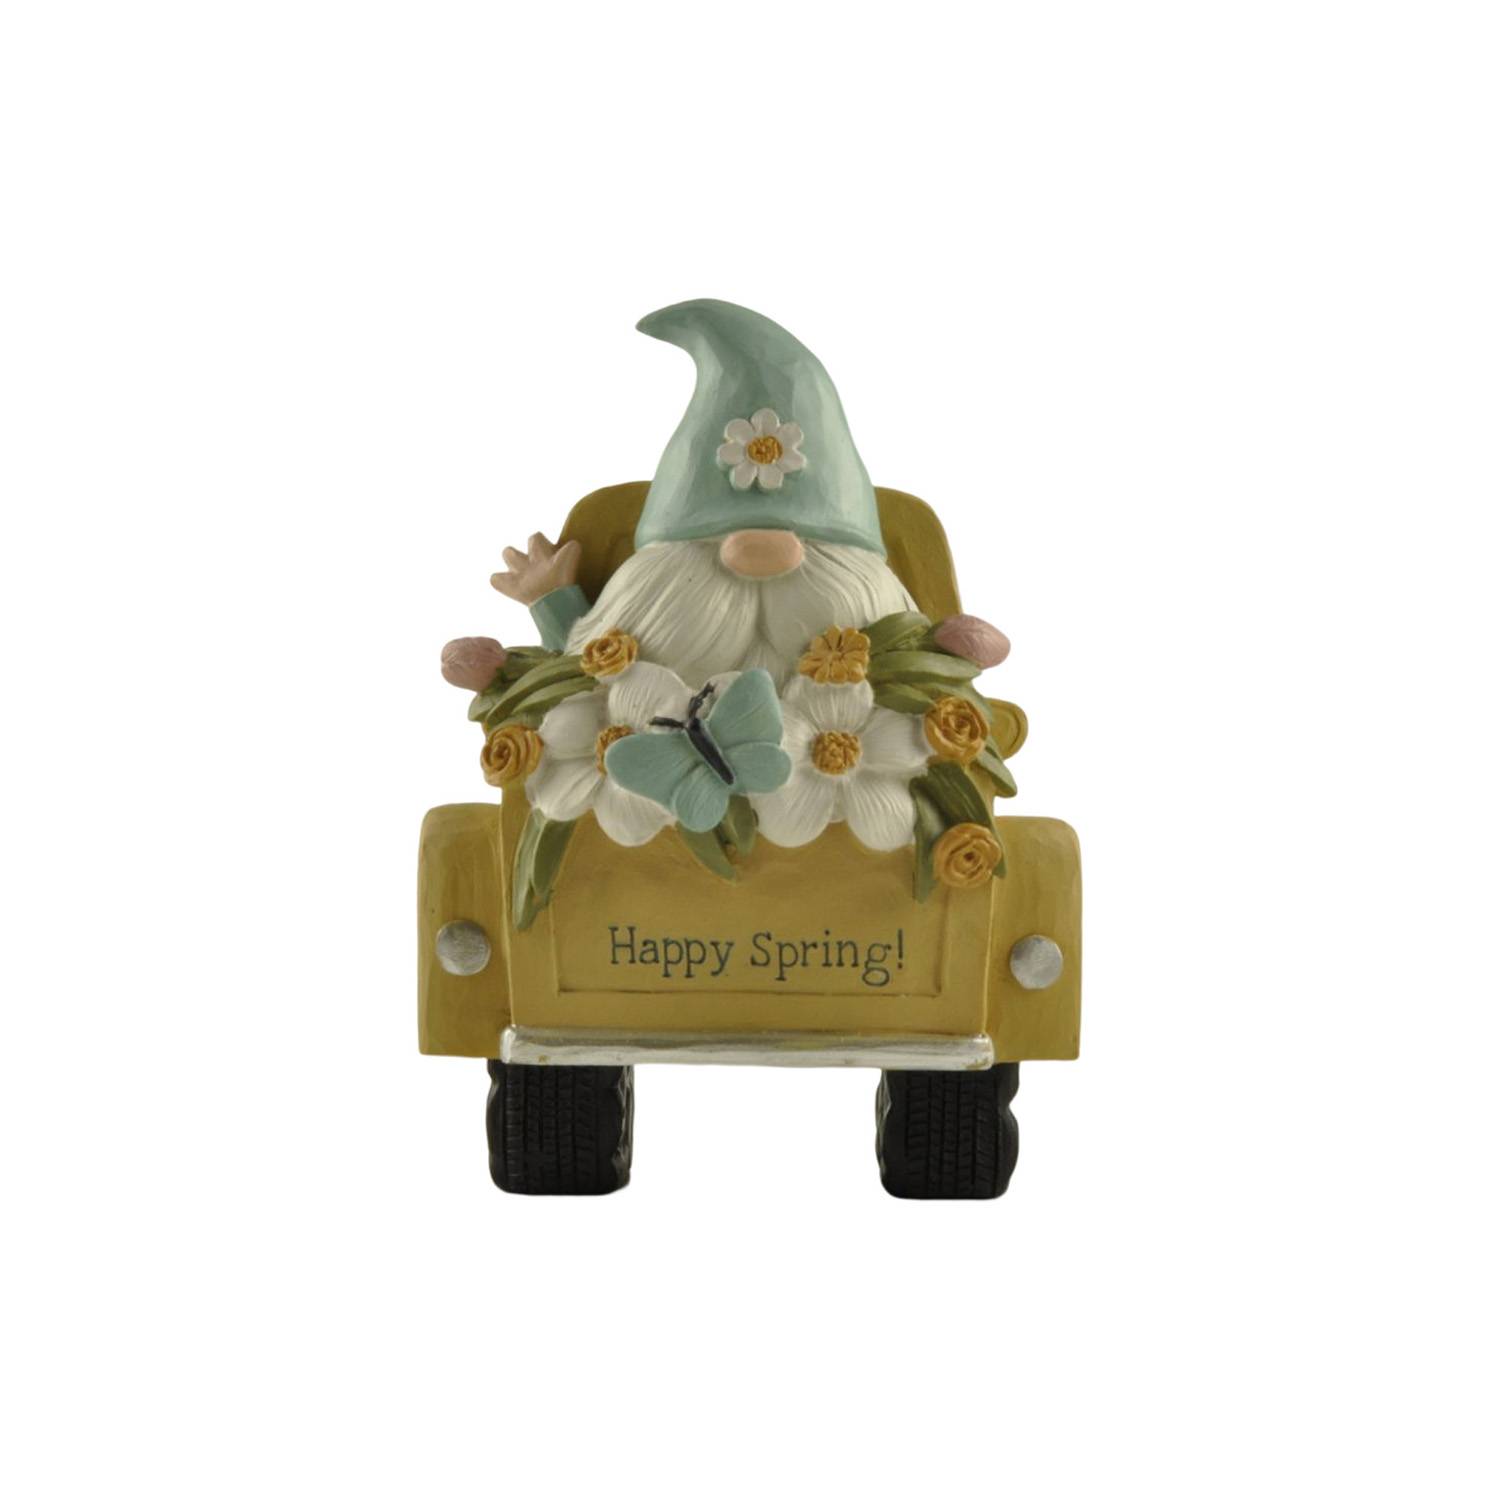 New Resin Hand Crafts Gnome on Truck-Happy Spring Table Gnome Decor Indoor Home Decorations231-13683